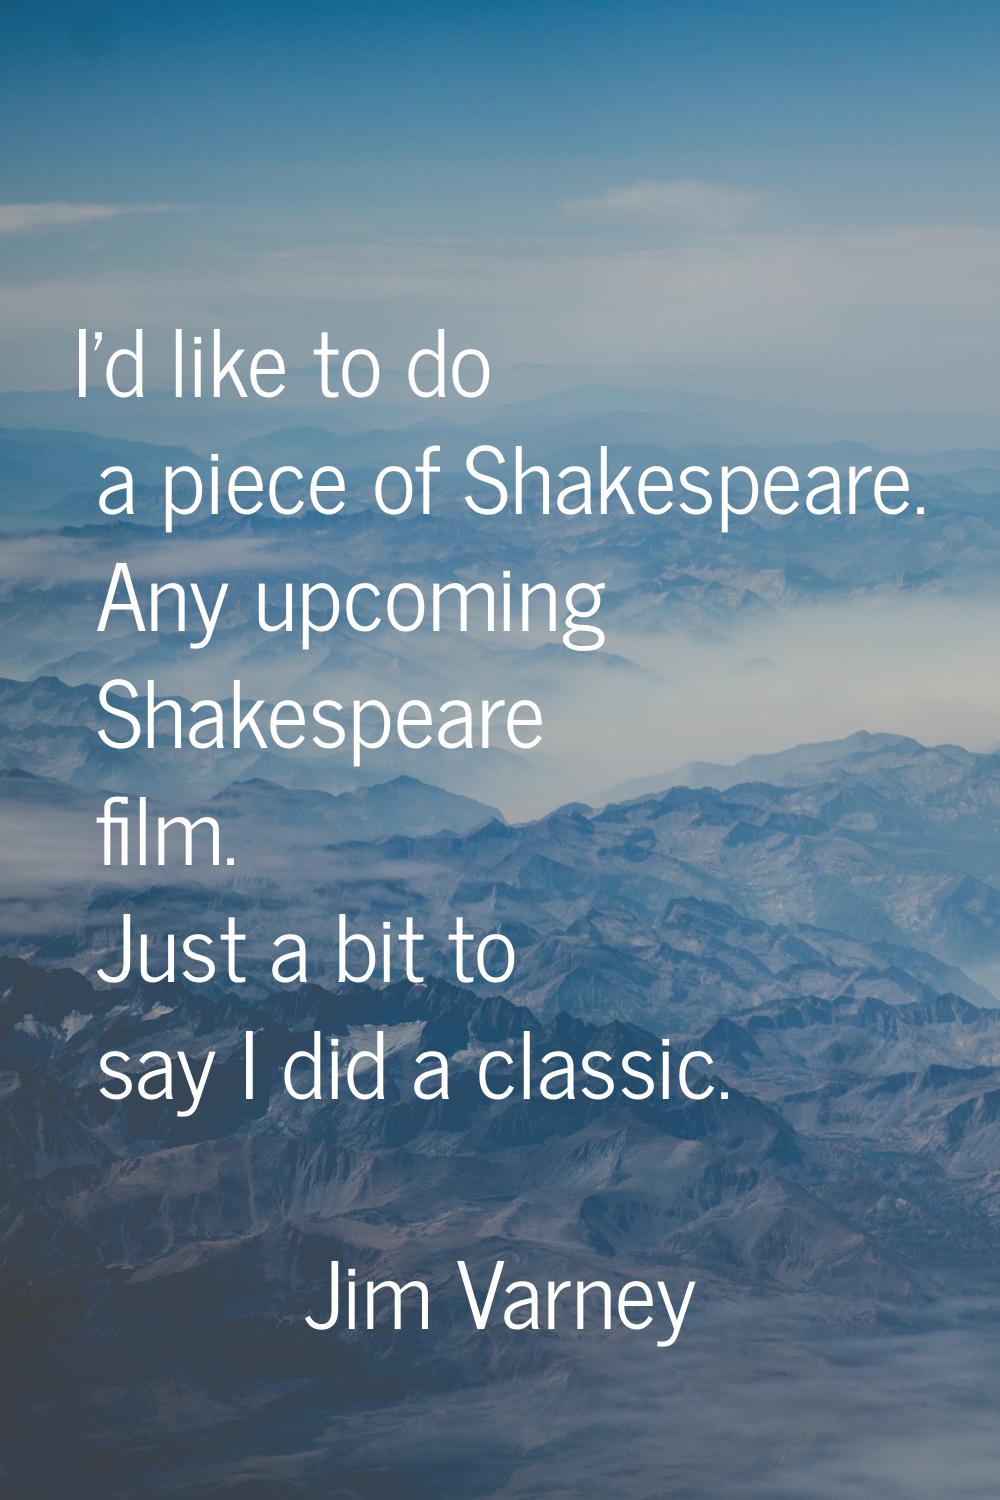 I'd like to do a piece of Shakespeare. Any upcoming Shakespeare film. Just a bit to say I did a cla